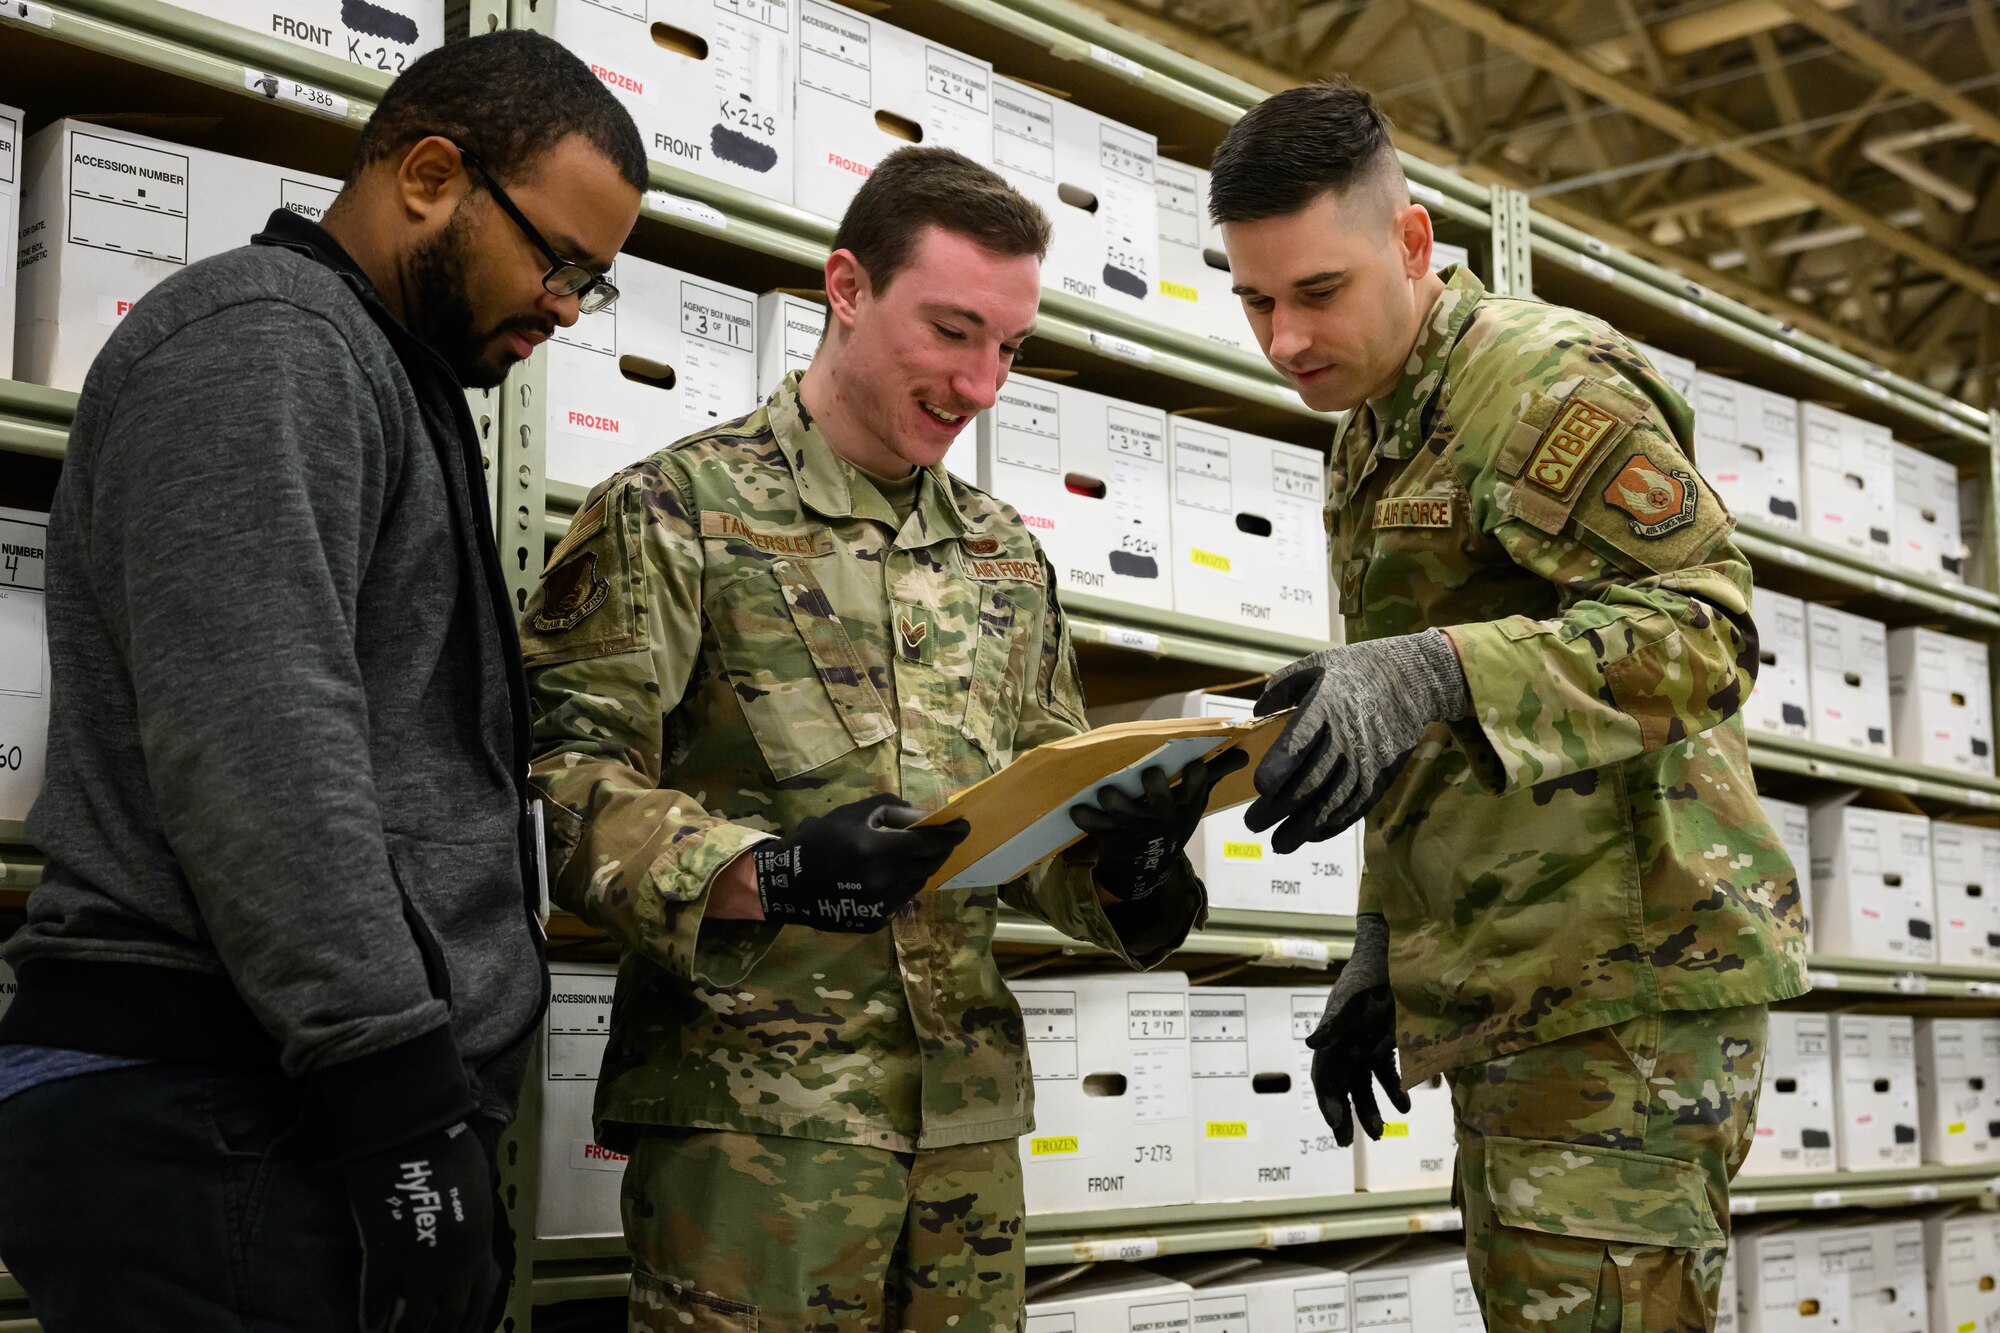 Left to right,  Bryce Terry, Senior Airman Brandon Tankersley and Staff Sgt. Jared Sylvester, 75th Communications and Information Directorate, process boxed records at the Records Staging Facility, Hill Air Force Base at Utah, Dec. 22, 2022.  The Office of Management and Budget directed the Air Force to close all agency operated paper storage facilities and transfer permanent and long-retention records to Federal Records Centers operated by the National Archives and Records Administration by Dec. 31, 2022. The staging facility at Hill provided supported to more than 100 organizations. (U.S. Air Force photo by R. Nial Bradshaw)